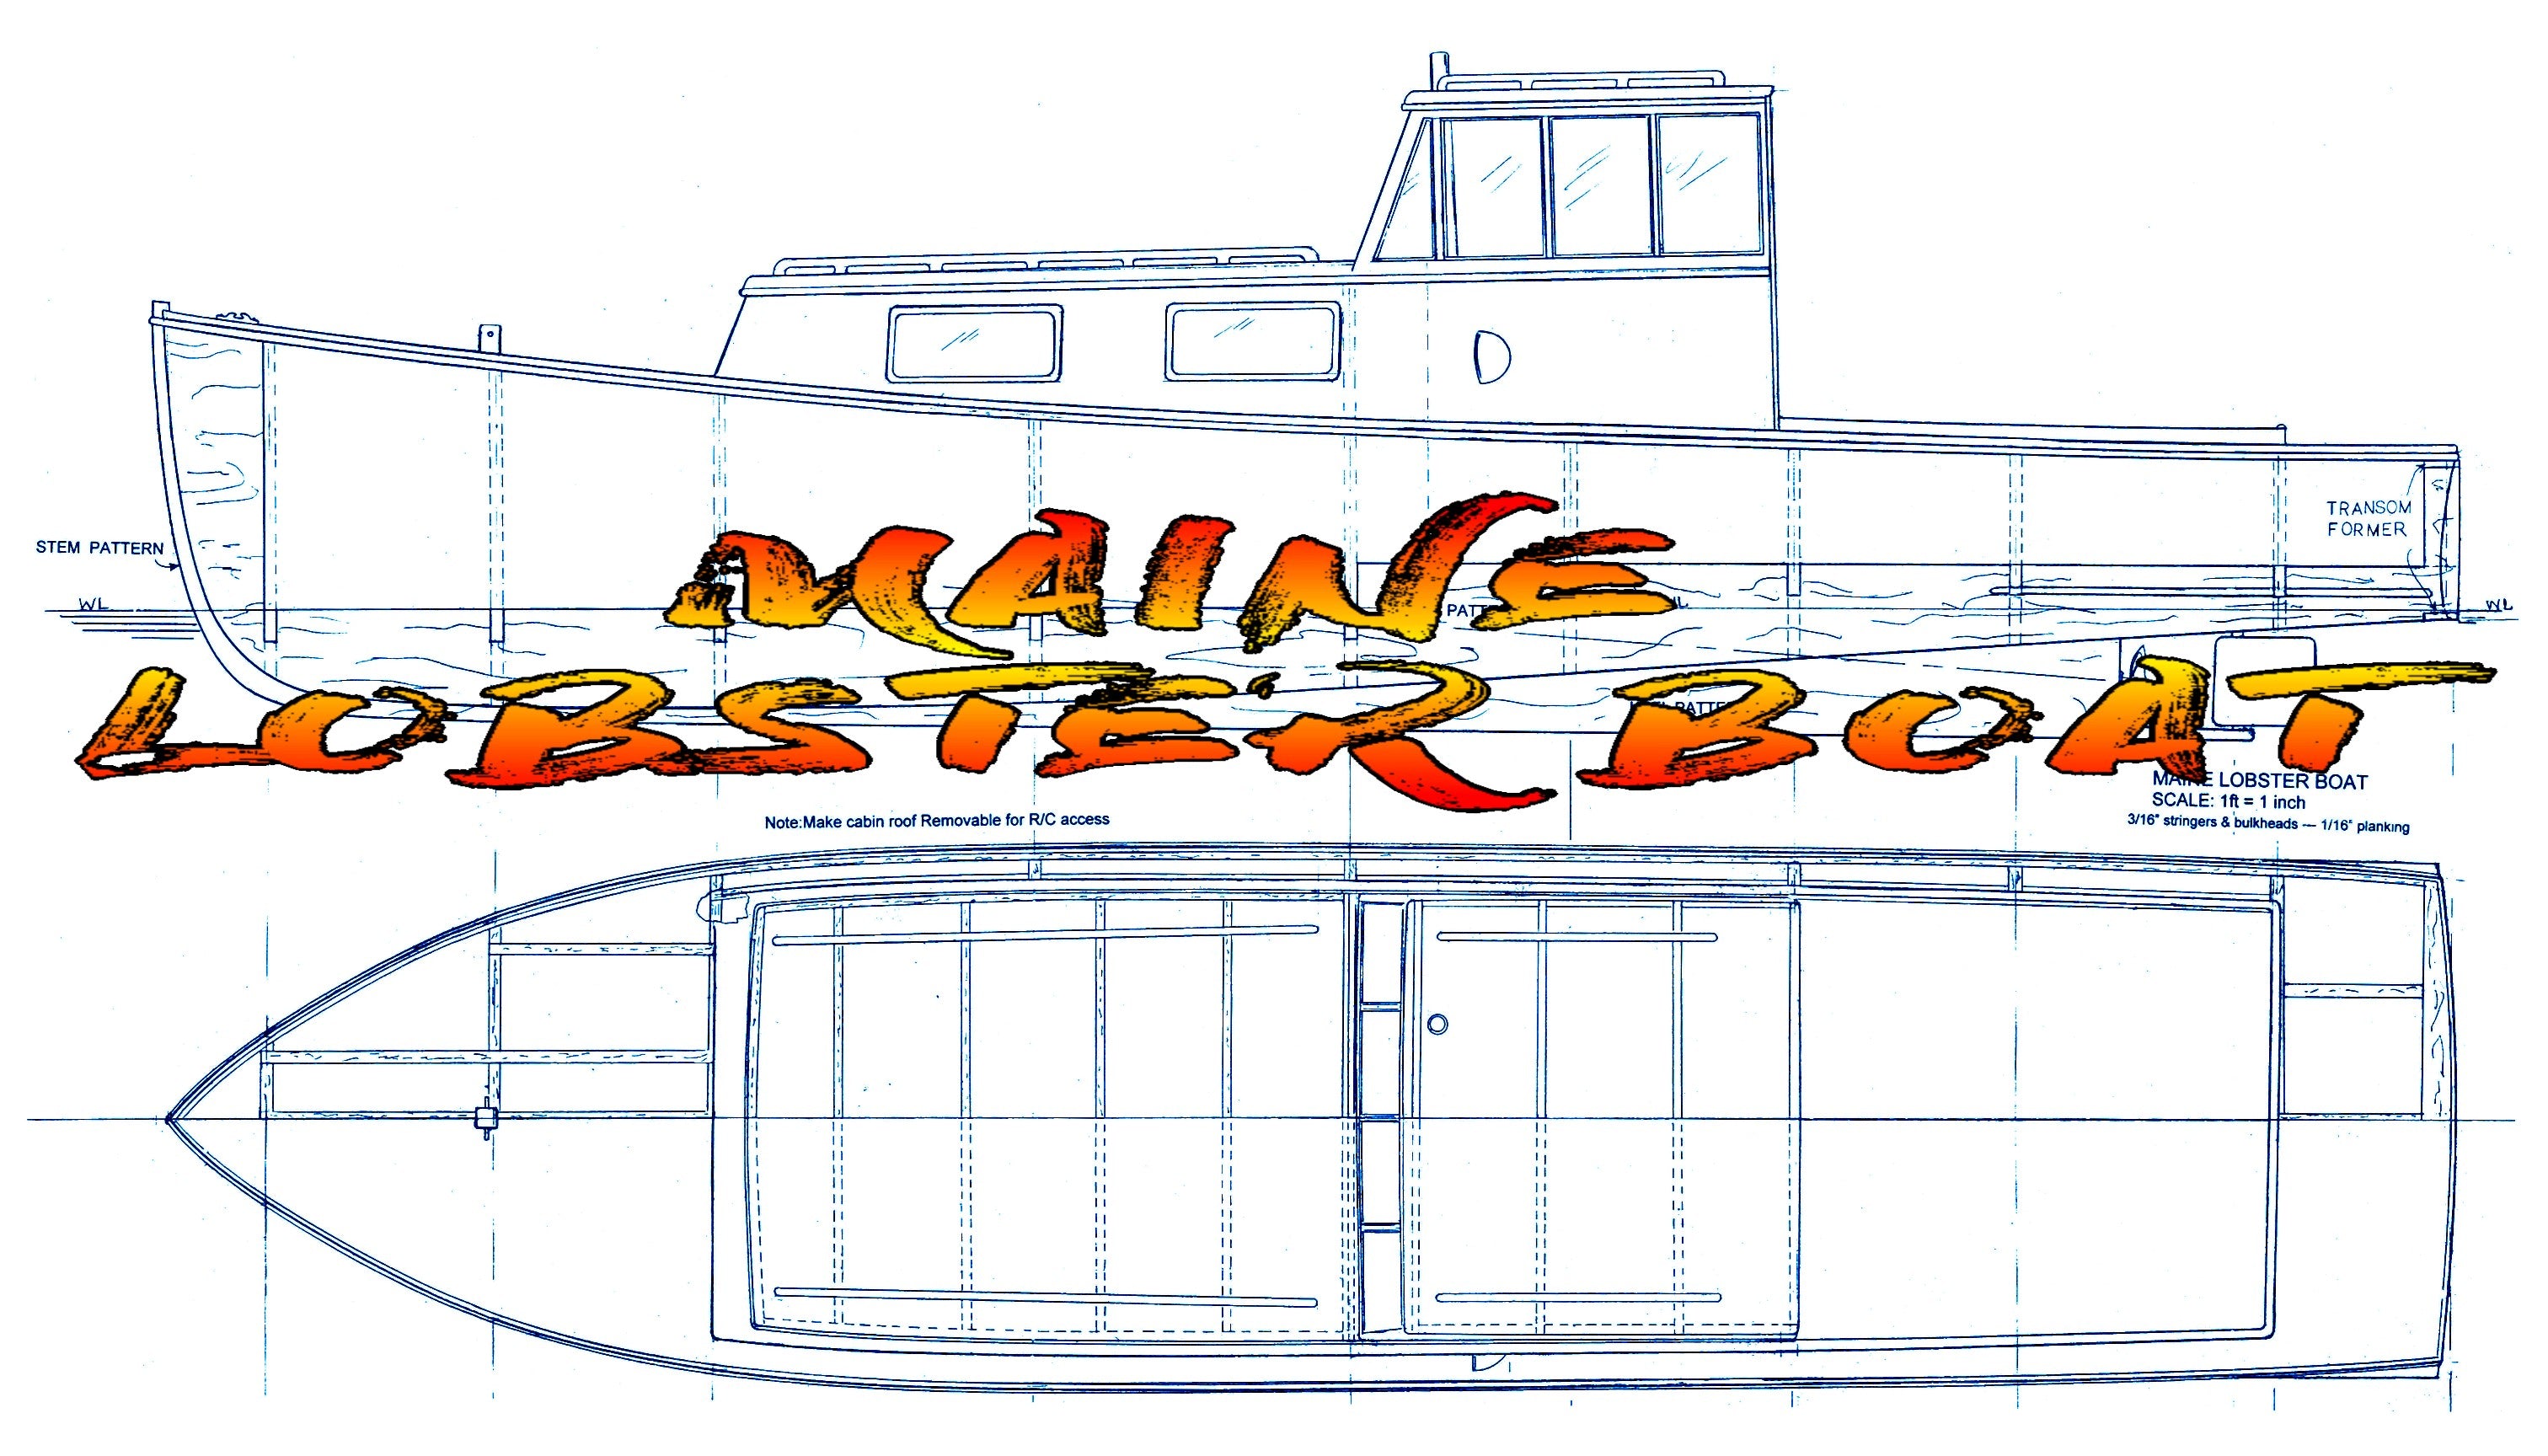 full size printed plans scale 1:16 full size printed plans  maine lobster boat l 38"  suitable for radio contro